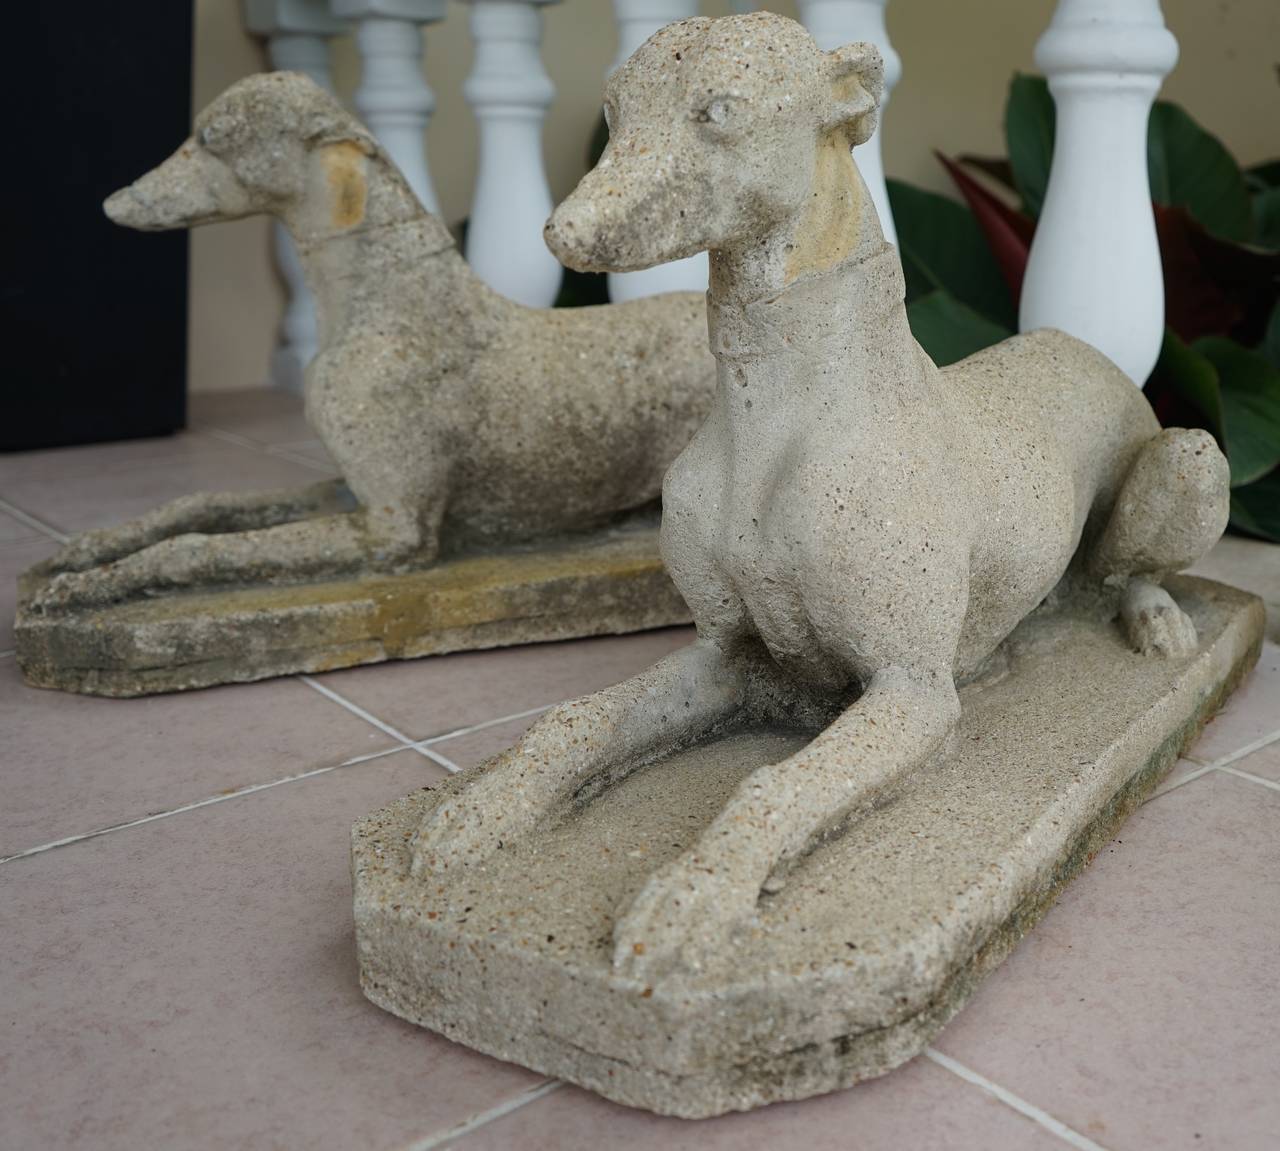 This pair of Whippets are of cast-stone and were made in England in the late 19th to the early 20th century.  They will make the perfect balance to the entry way of your home or a special place in the garden.

Please feel free to contact us